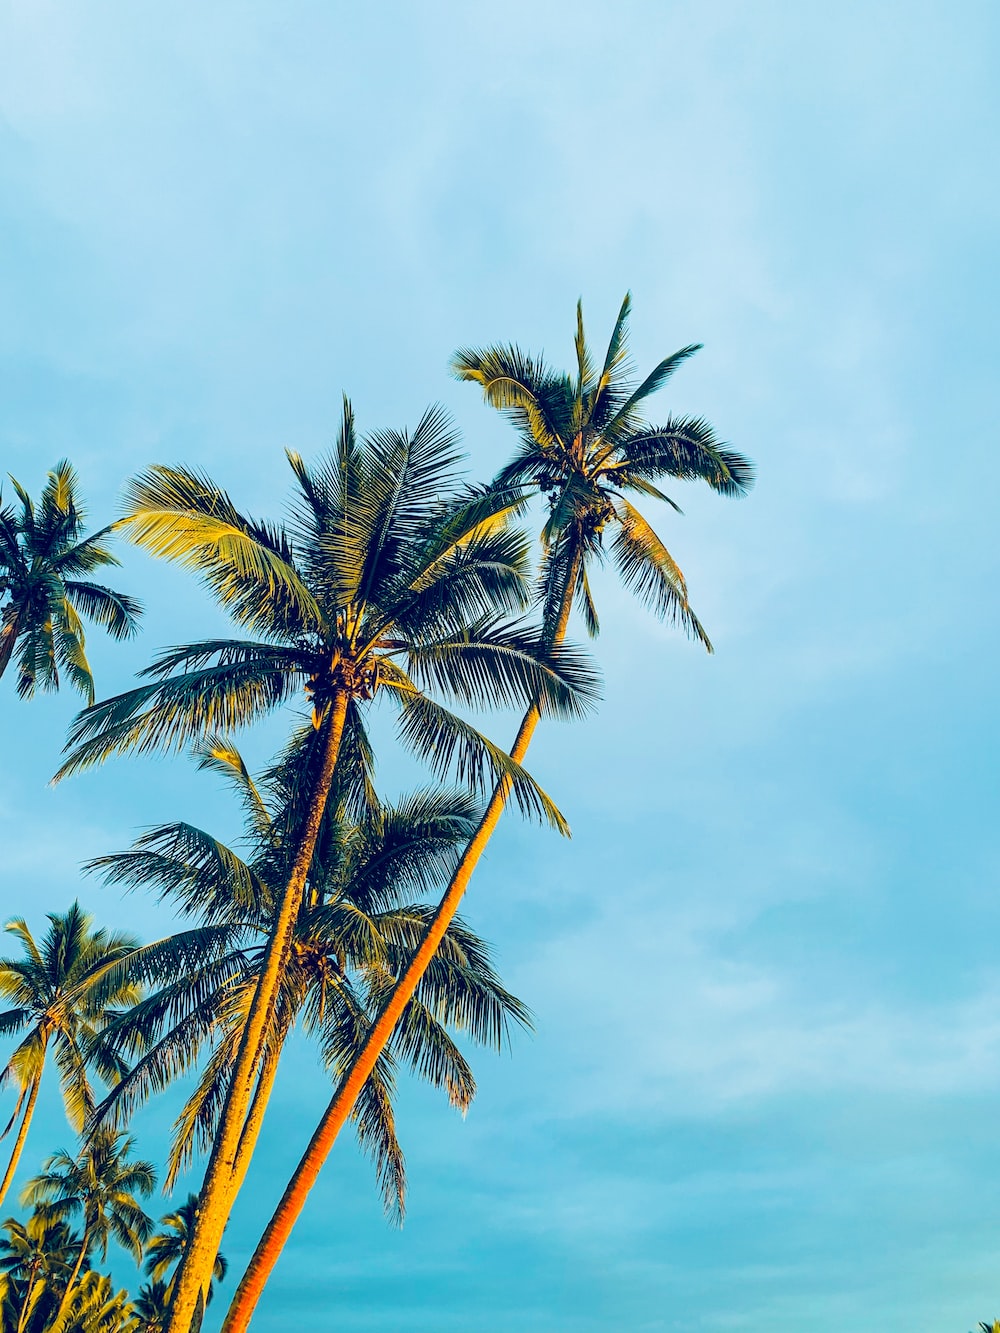 Coconut Trees Under Blue Sky During Daytime Photo Image On